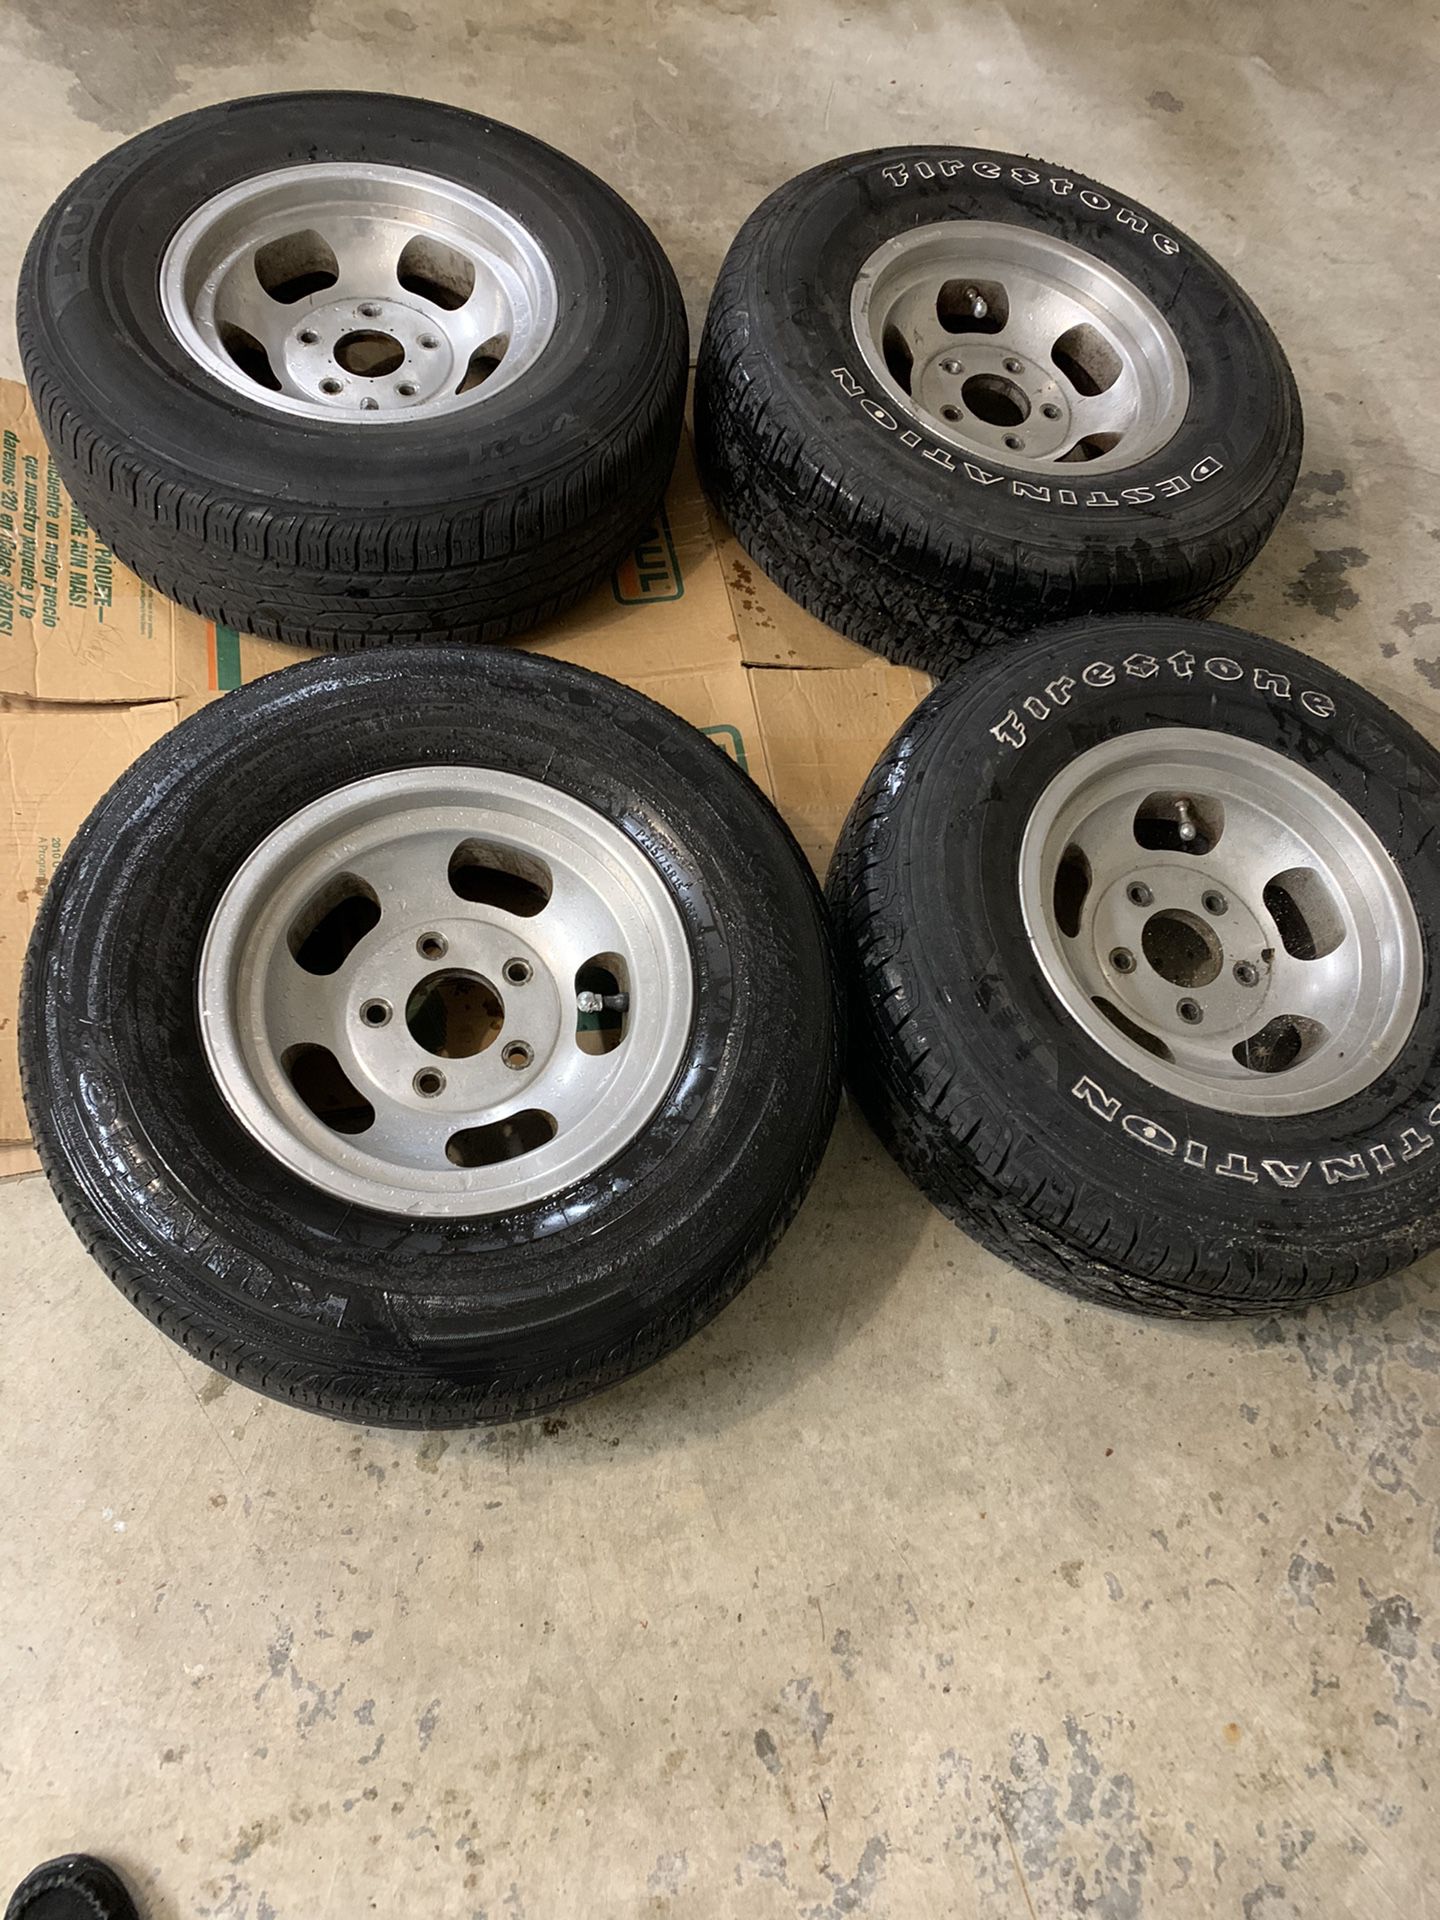 Ford Jeep Dodge Truck or Van size slotted mag wheels with two almost new tires!